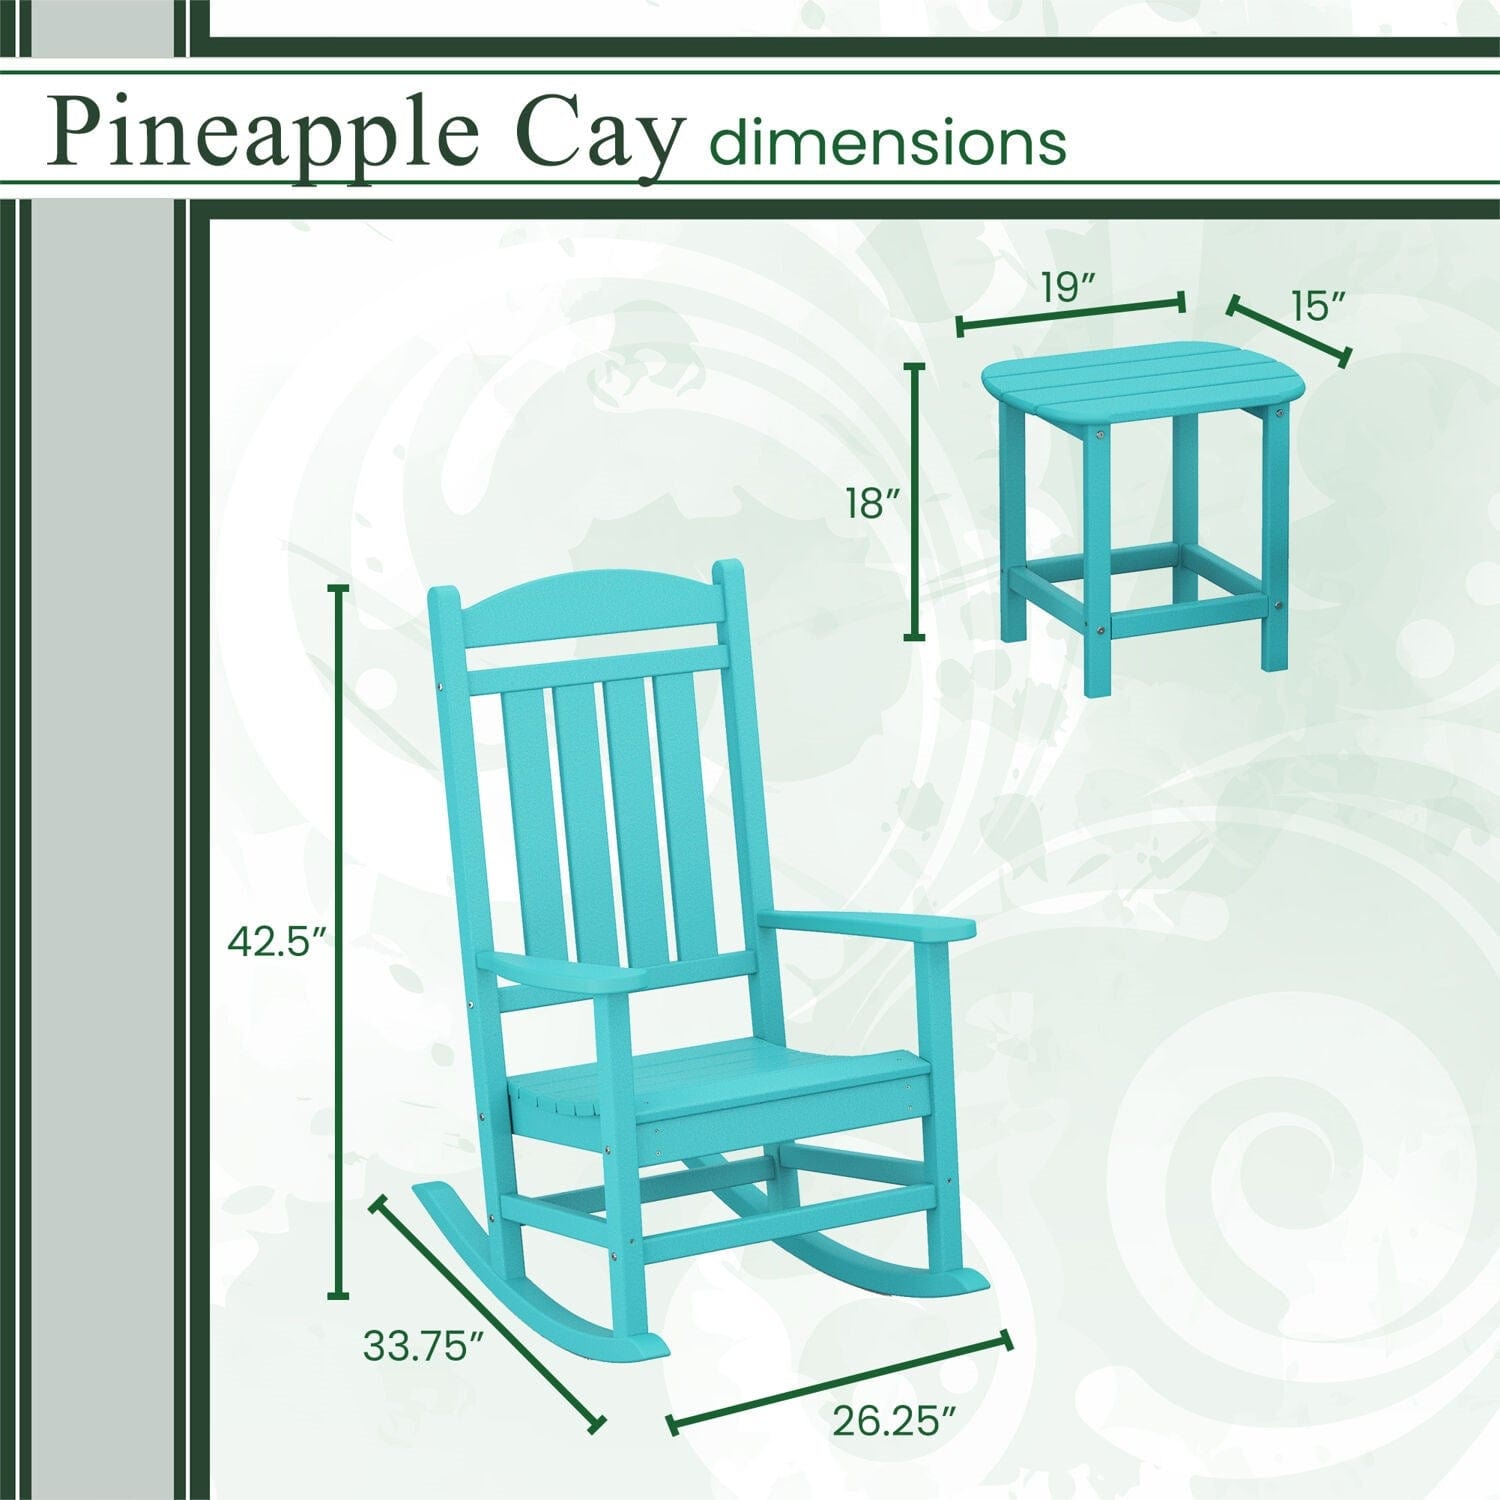 Hanover Outdoor Deep Seating Hanover Pineapple Cay All-Weather Porch Rocking Chair Set with 2 Rockers and an 19" x 15" Side Table in Blue | PINE3PC-BLU